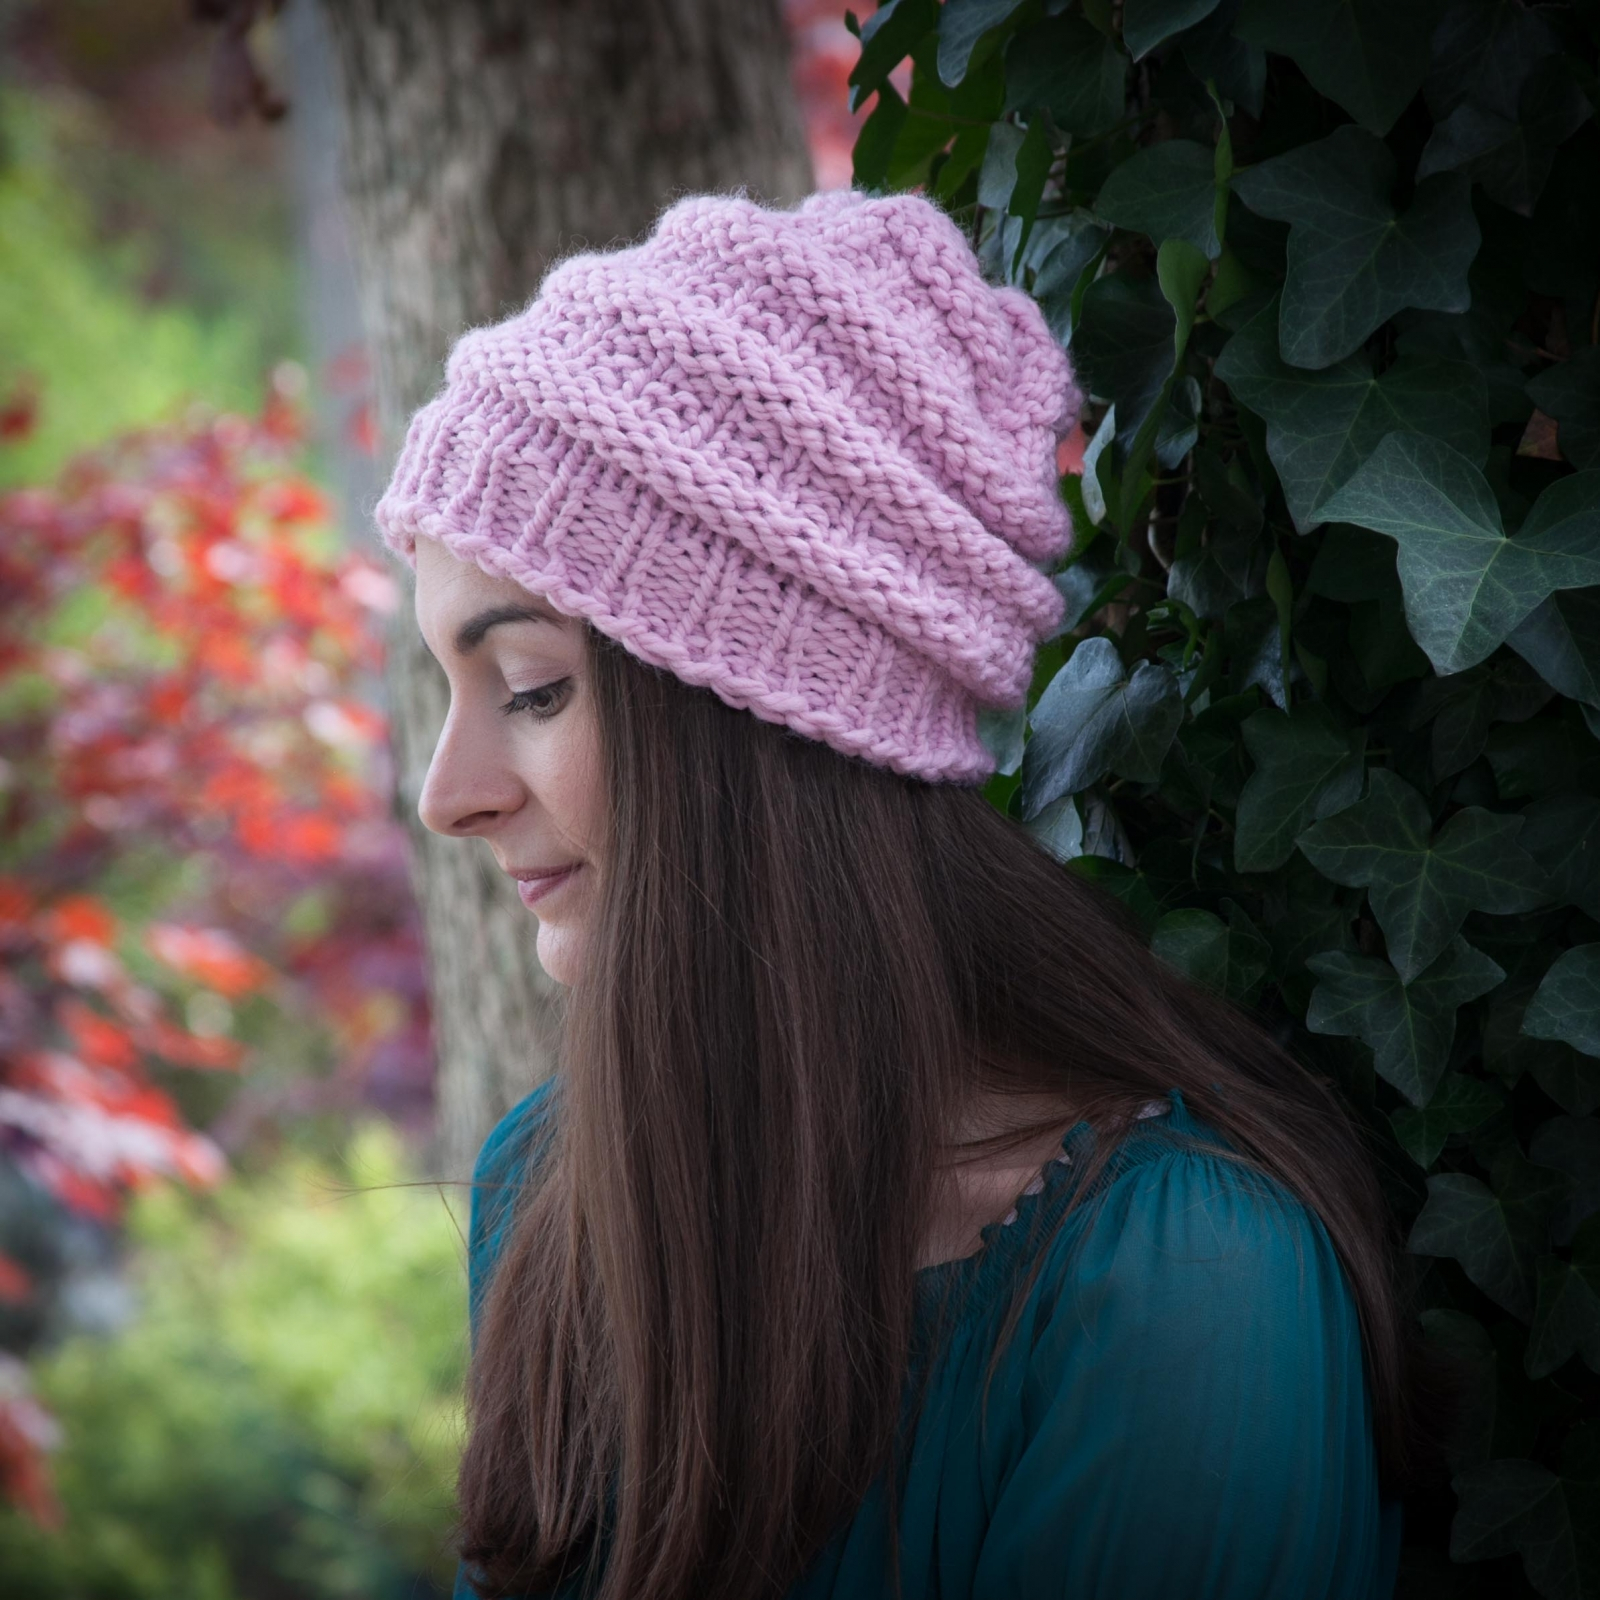 Round Loom Knitting Patterns Download Loom Knit Hat Pattern Slouch Hat Beanie Textured Bulky Chunky Knit Hat Pdf Pattern Download